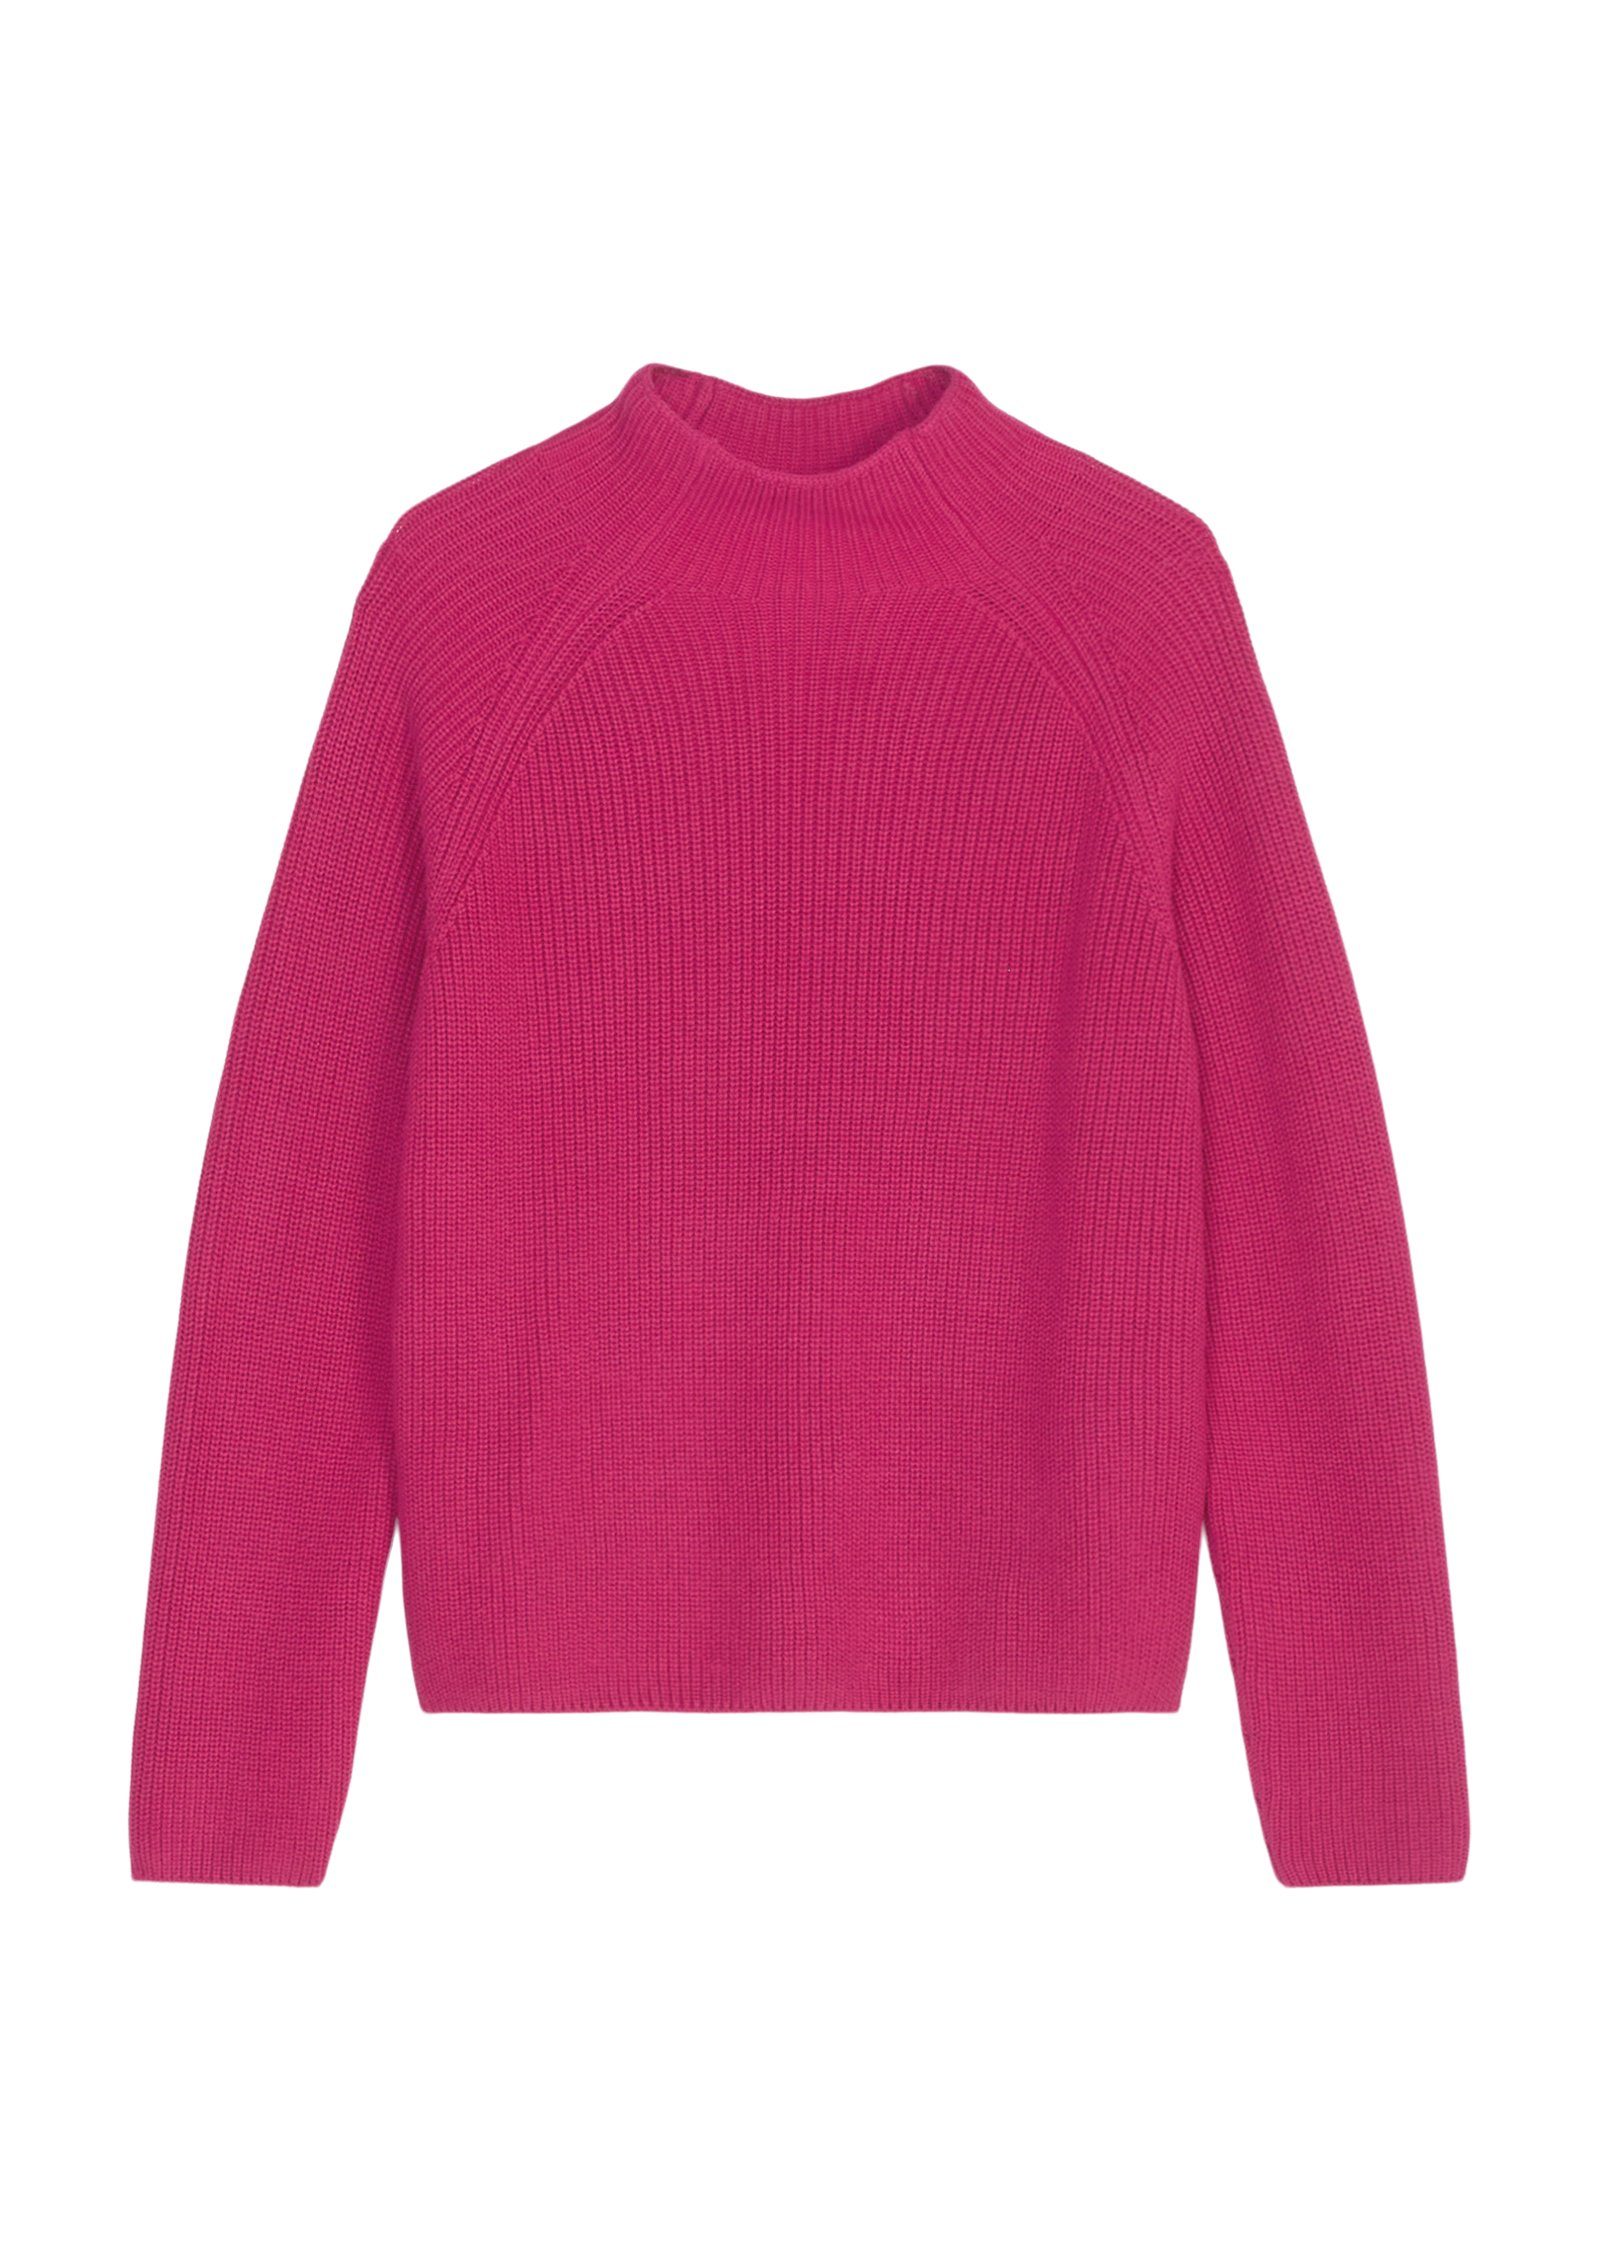 Marc O'Polo Strickpullover vibrant pink